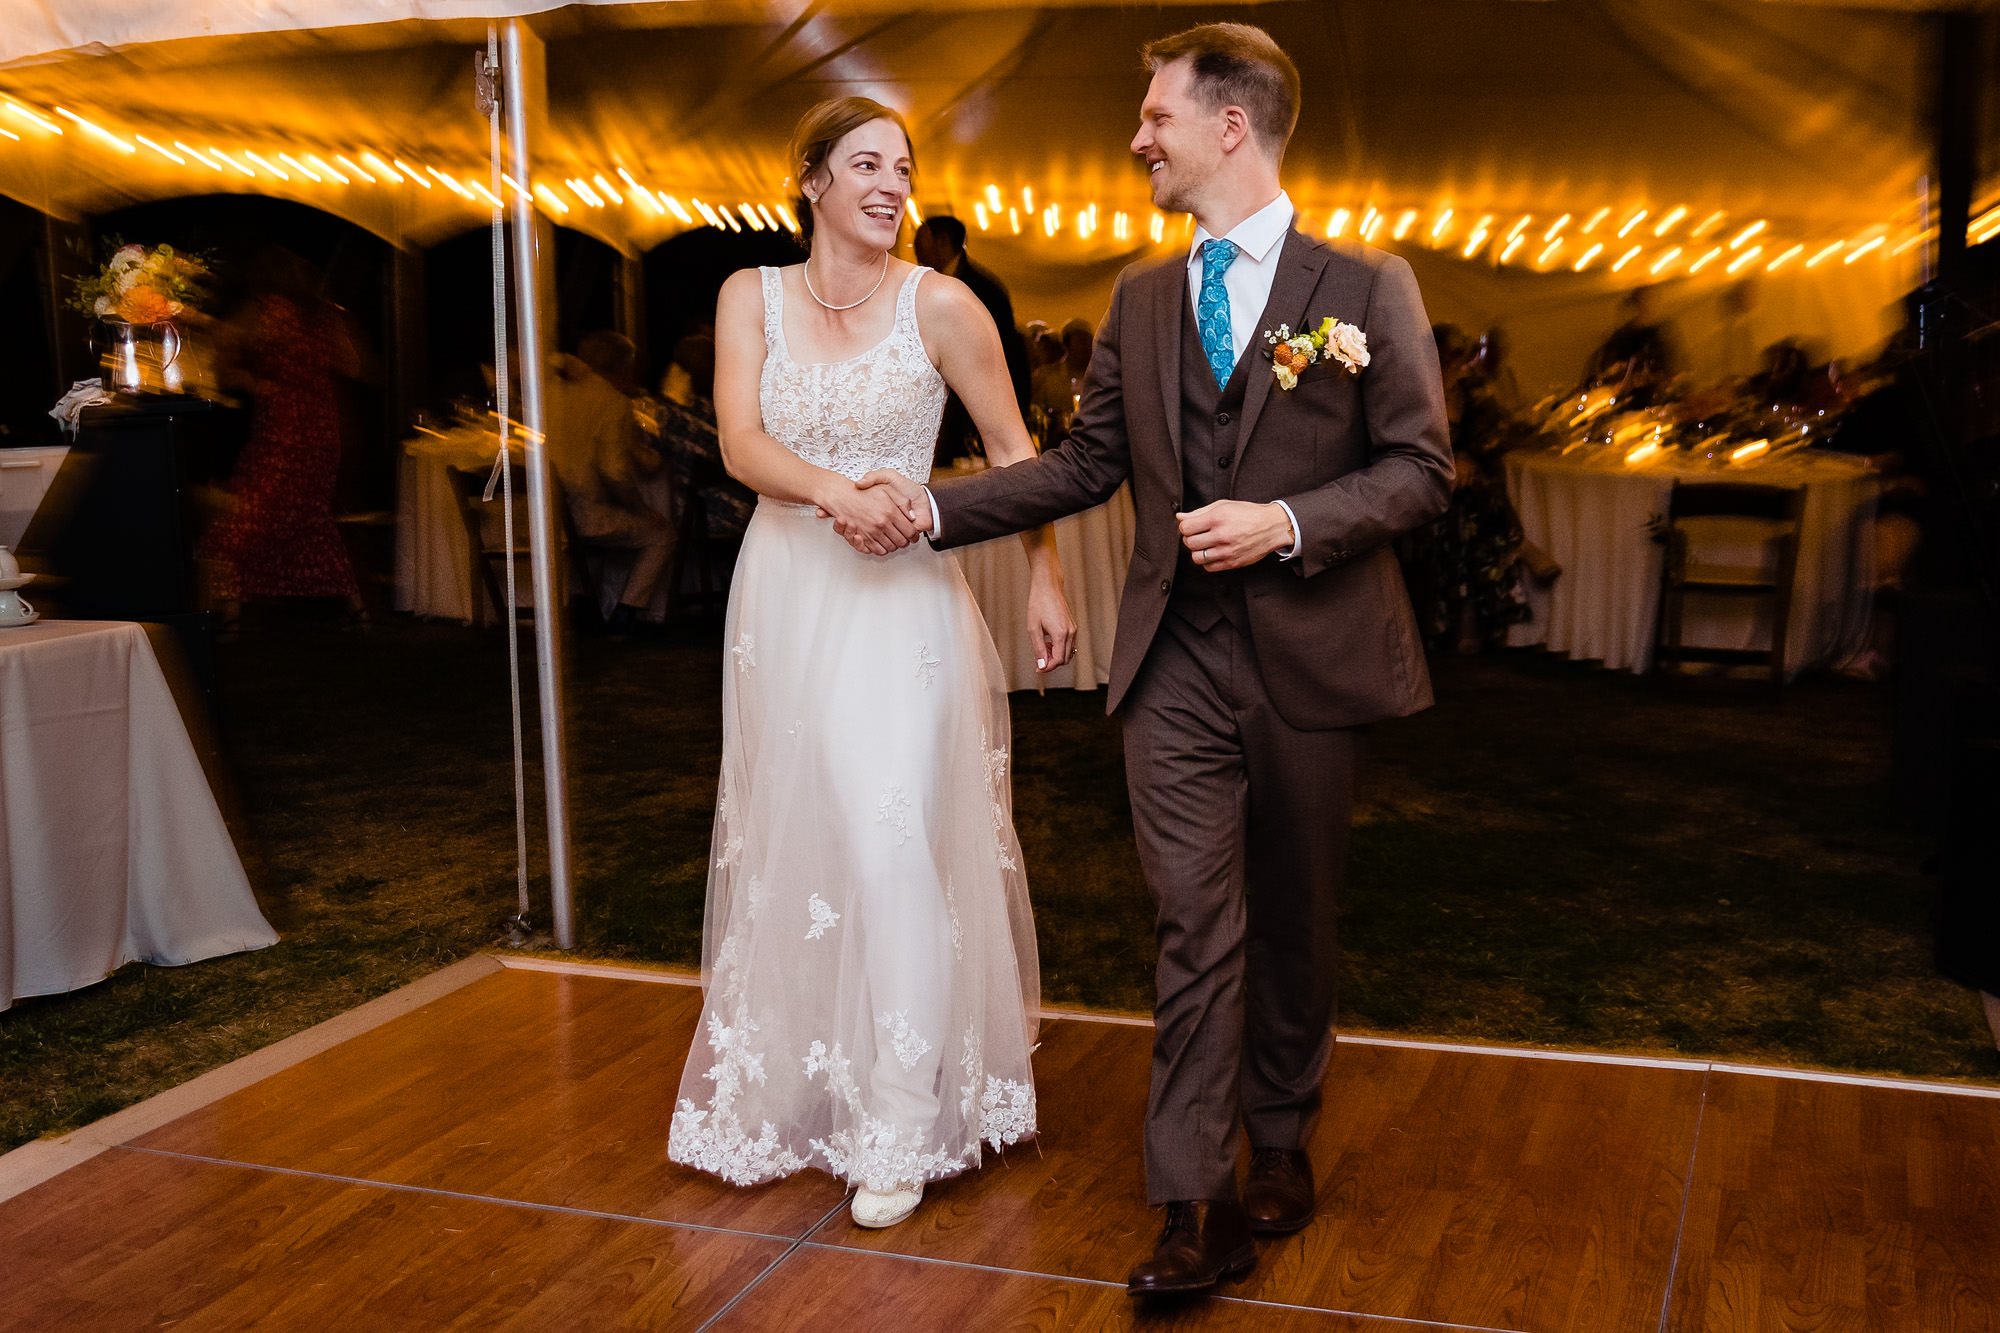 A tented wedding reception at Grey Havens Inn in Georgetown, Maine